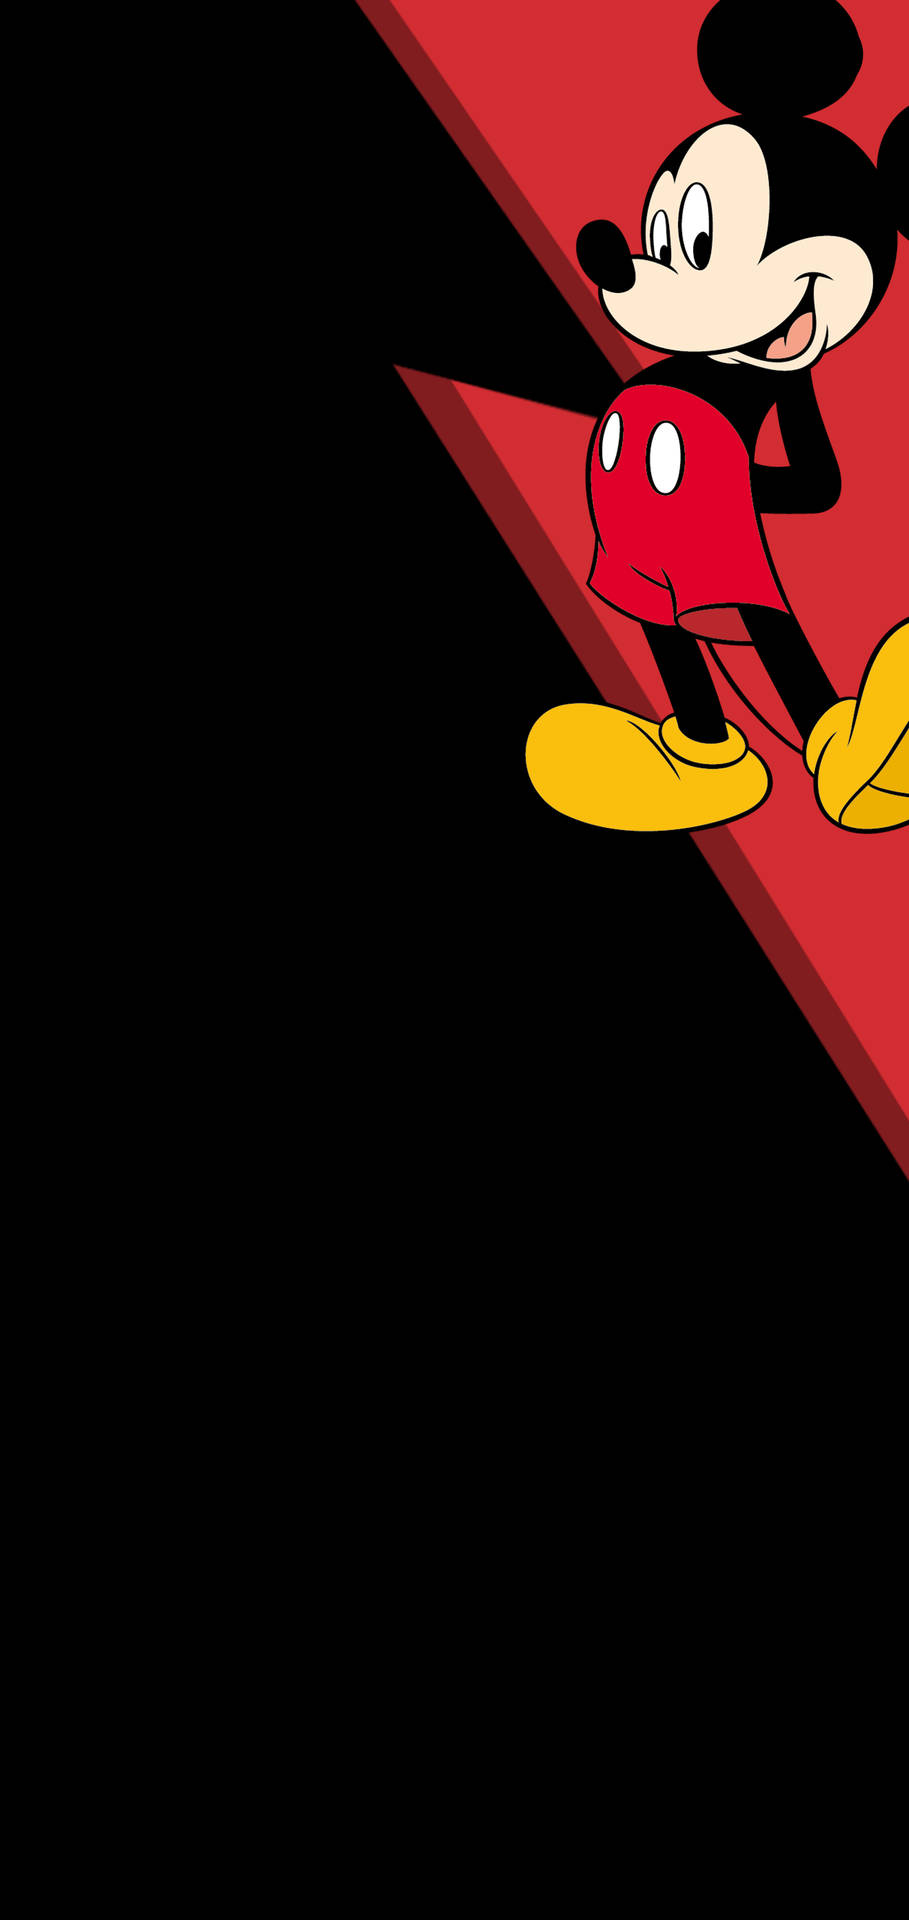 Mickey Mouse on Galaxy S10+ Screen Wallpaper